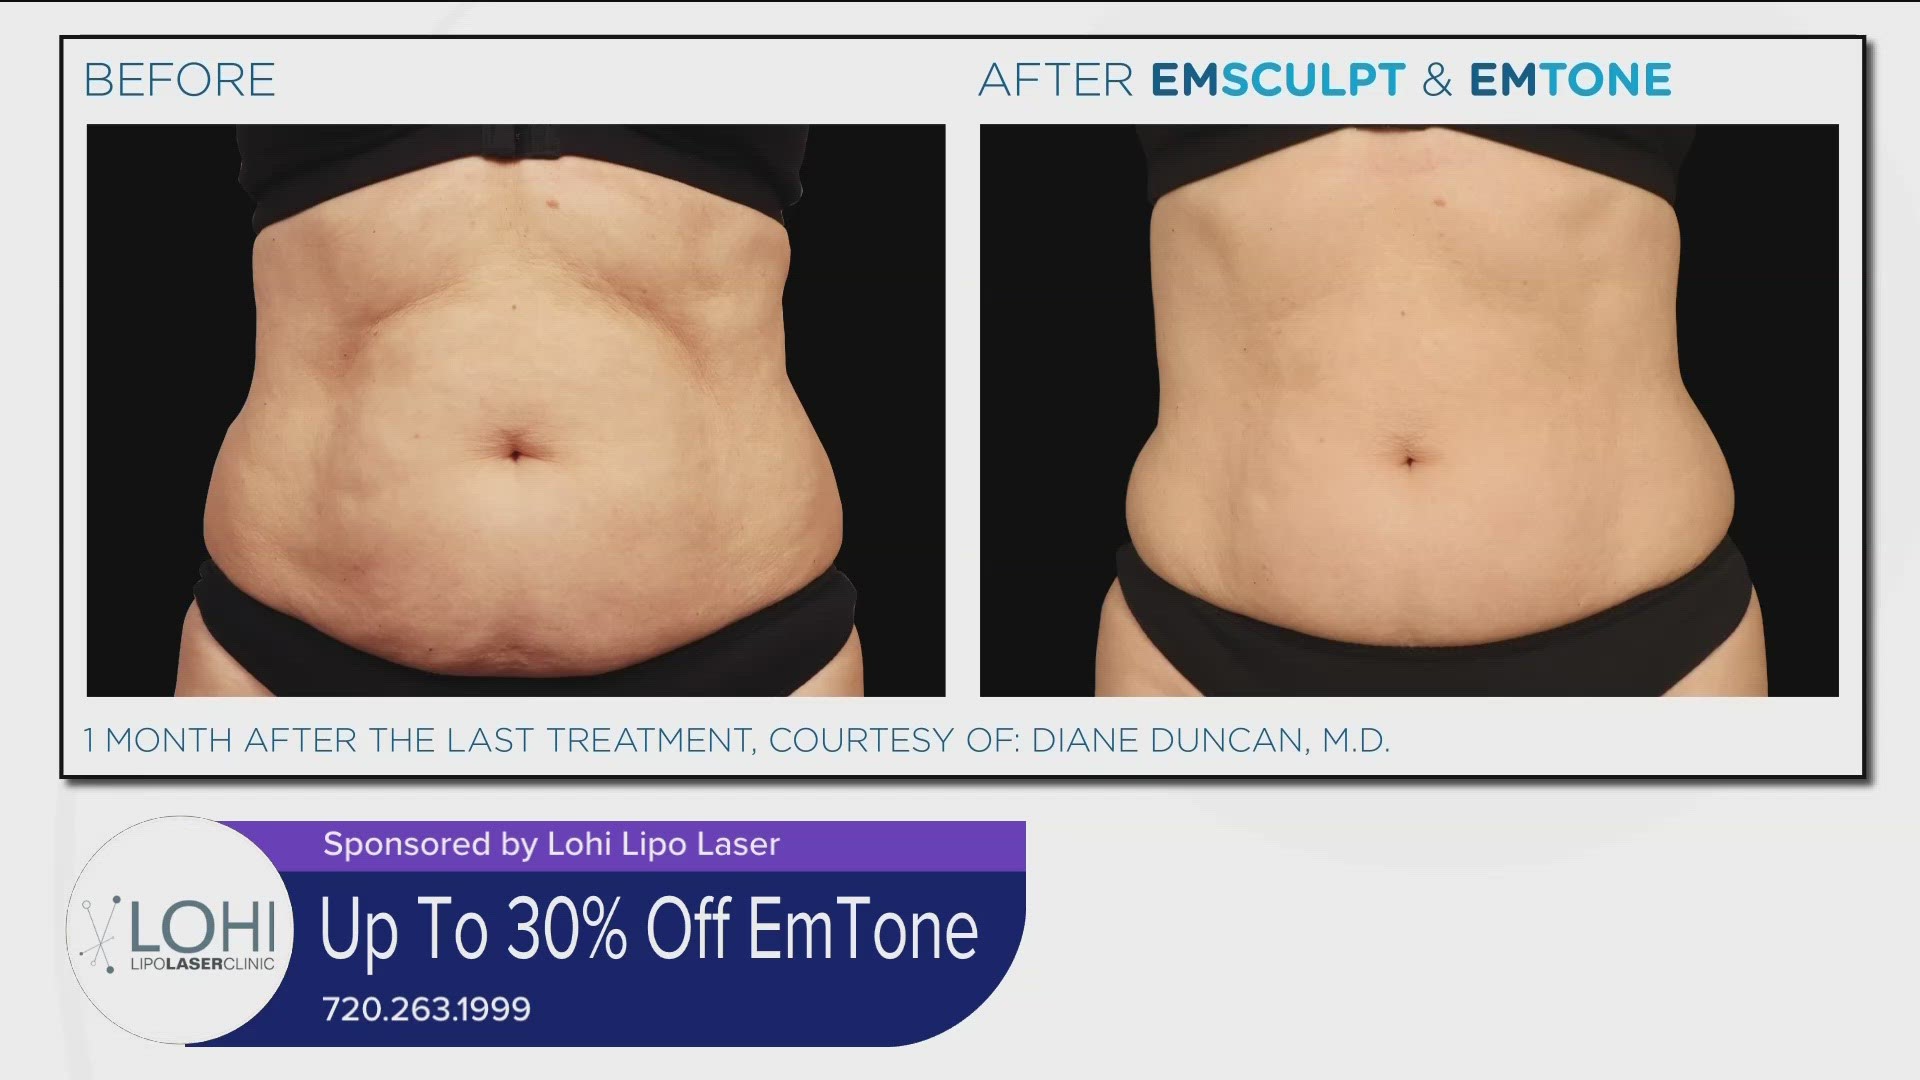 Try EmTone and get up to 30% off your treatment package. Call 720.263.1999 and schedule a free consultation. Learn more at LohiLipoLaser.com. **PAID CONTENT**